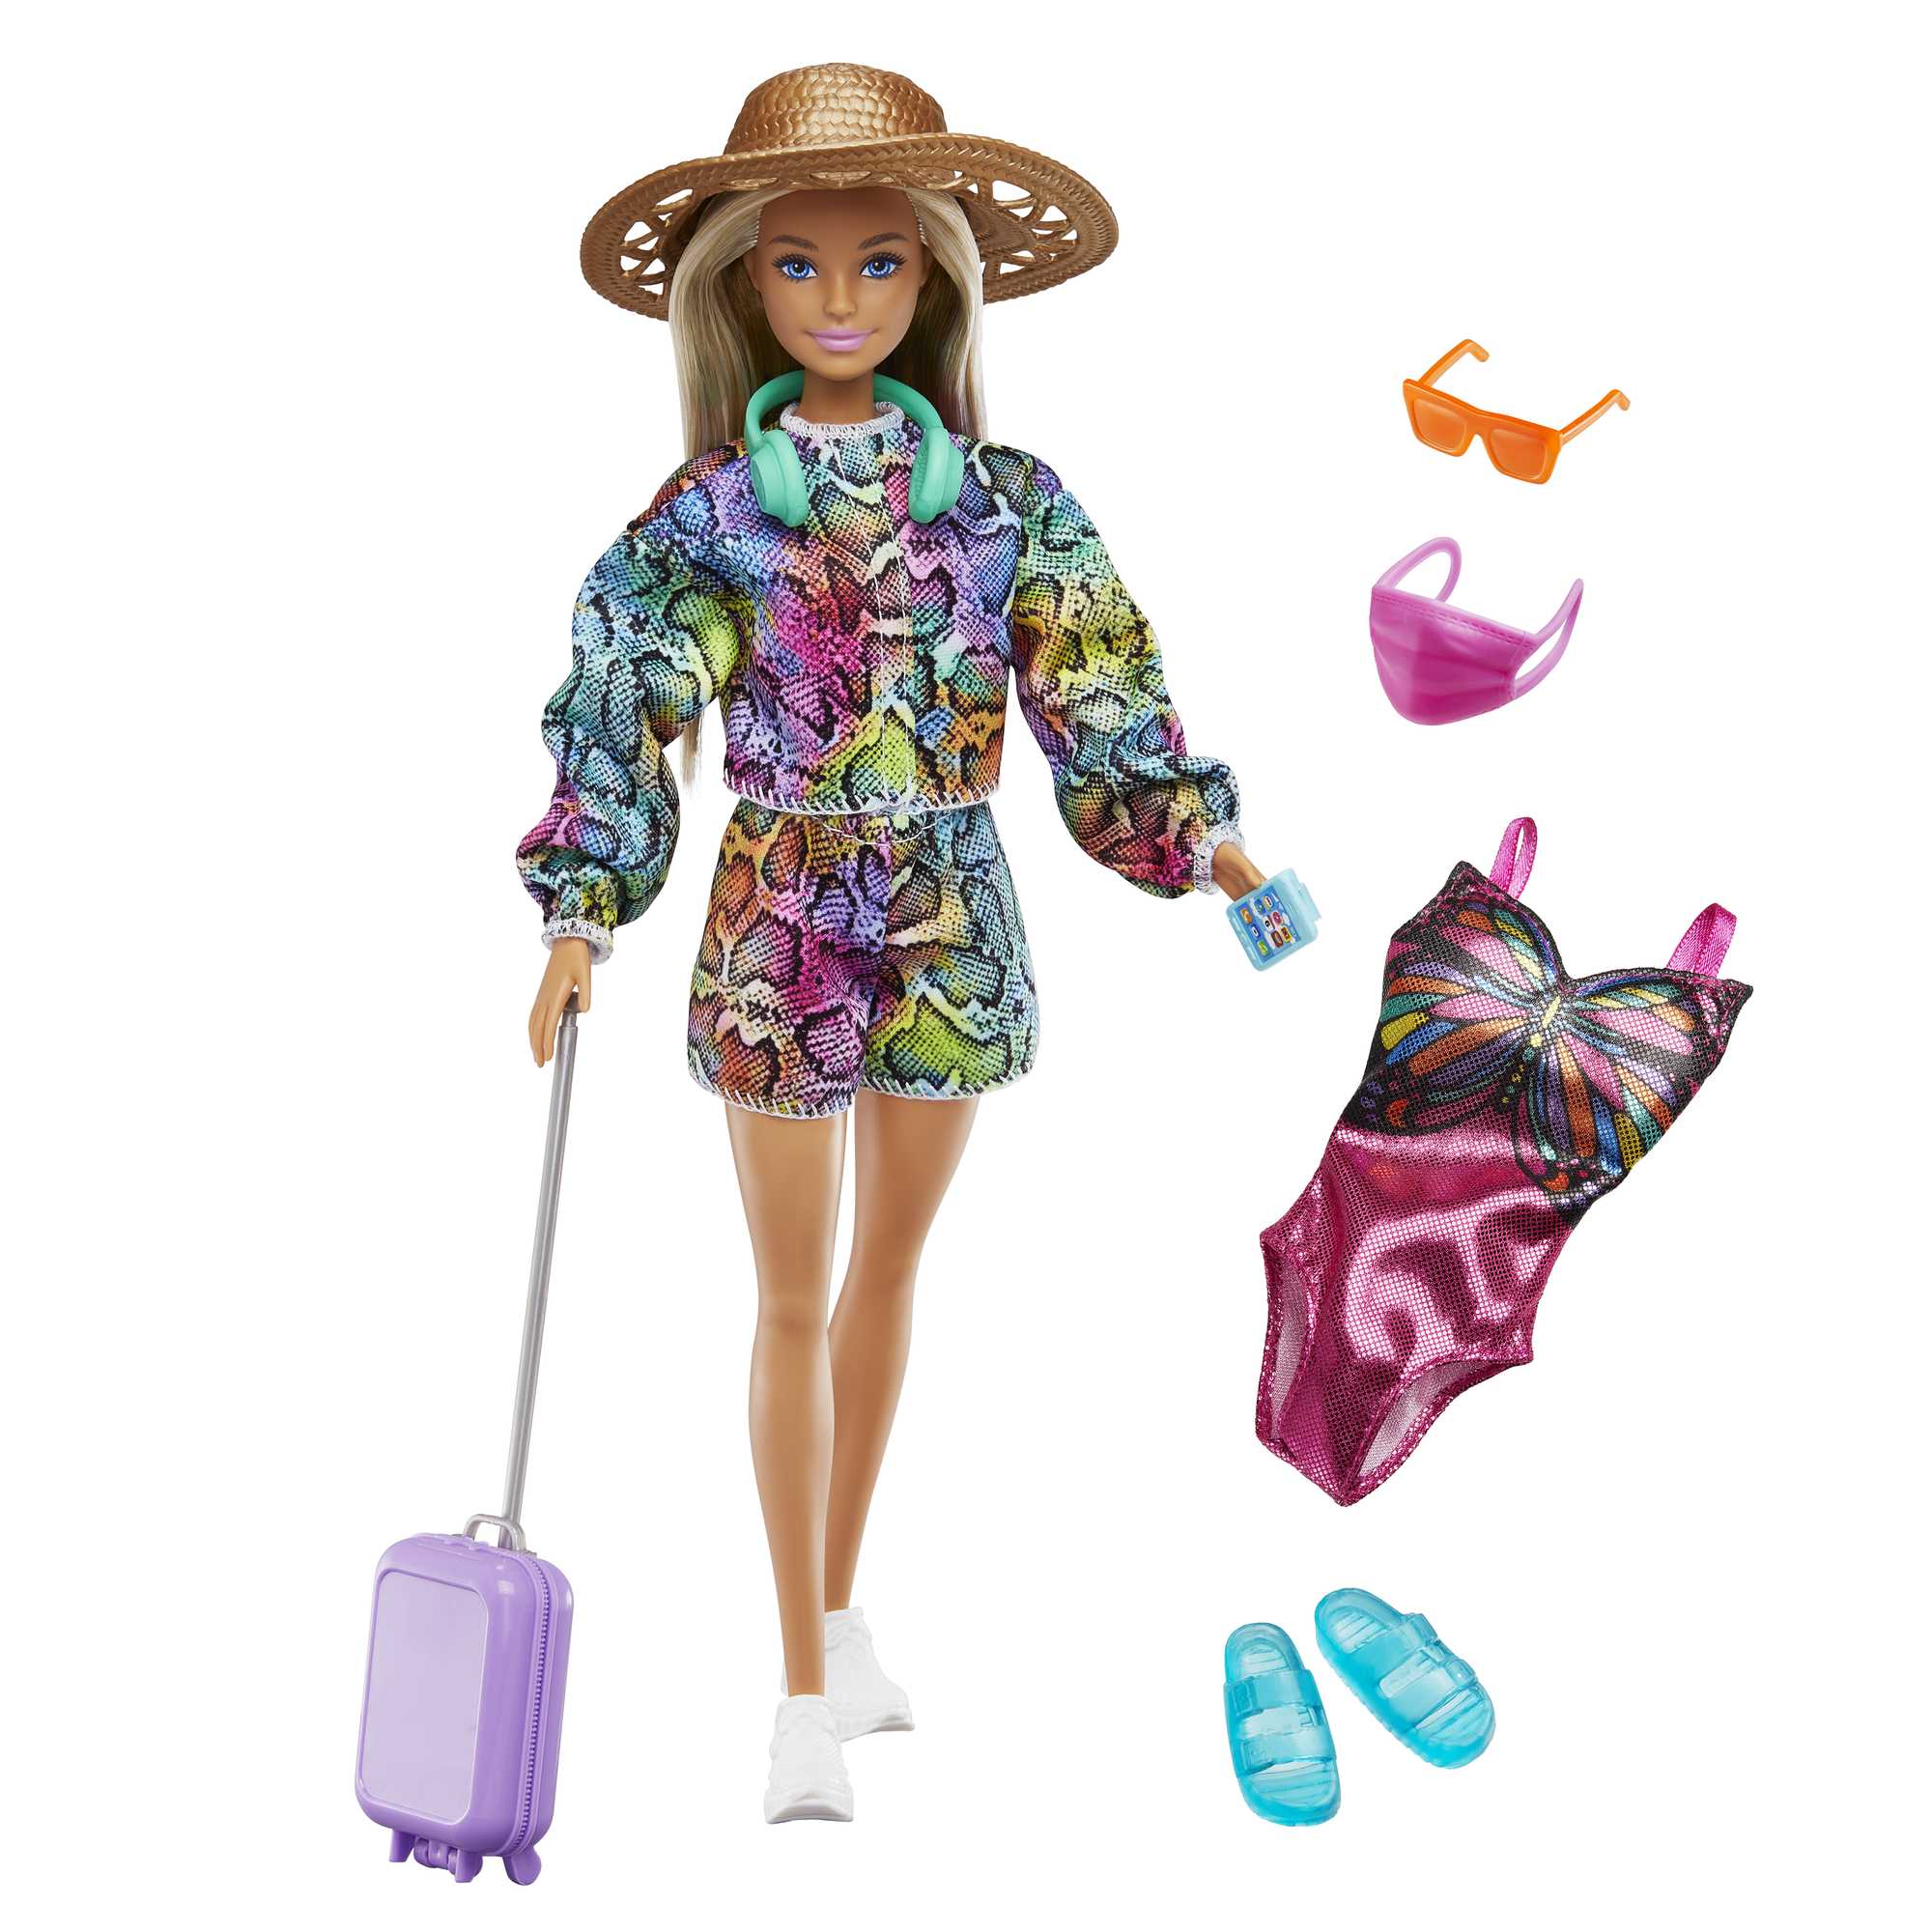 Barbie Holiday Fun and Accessories| Mattel